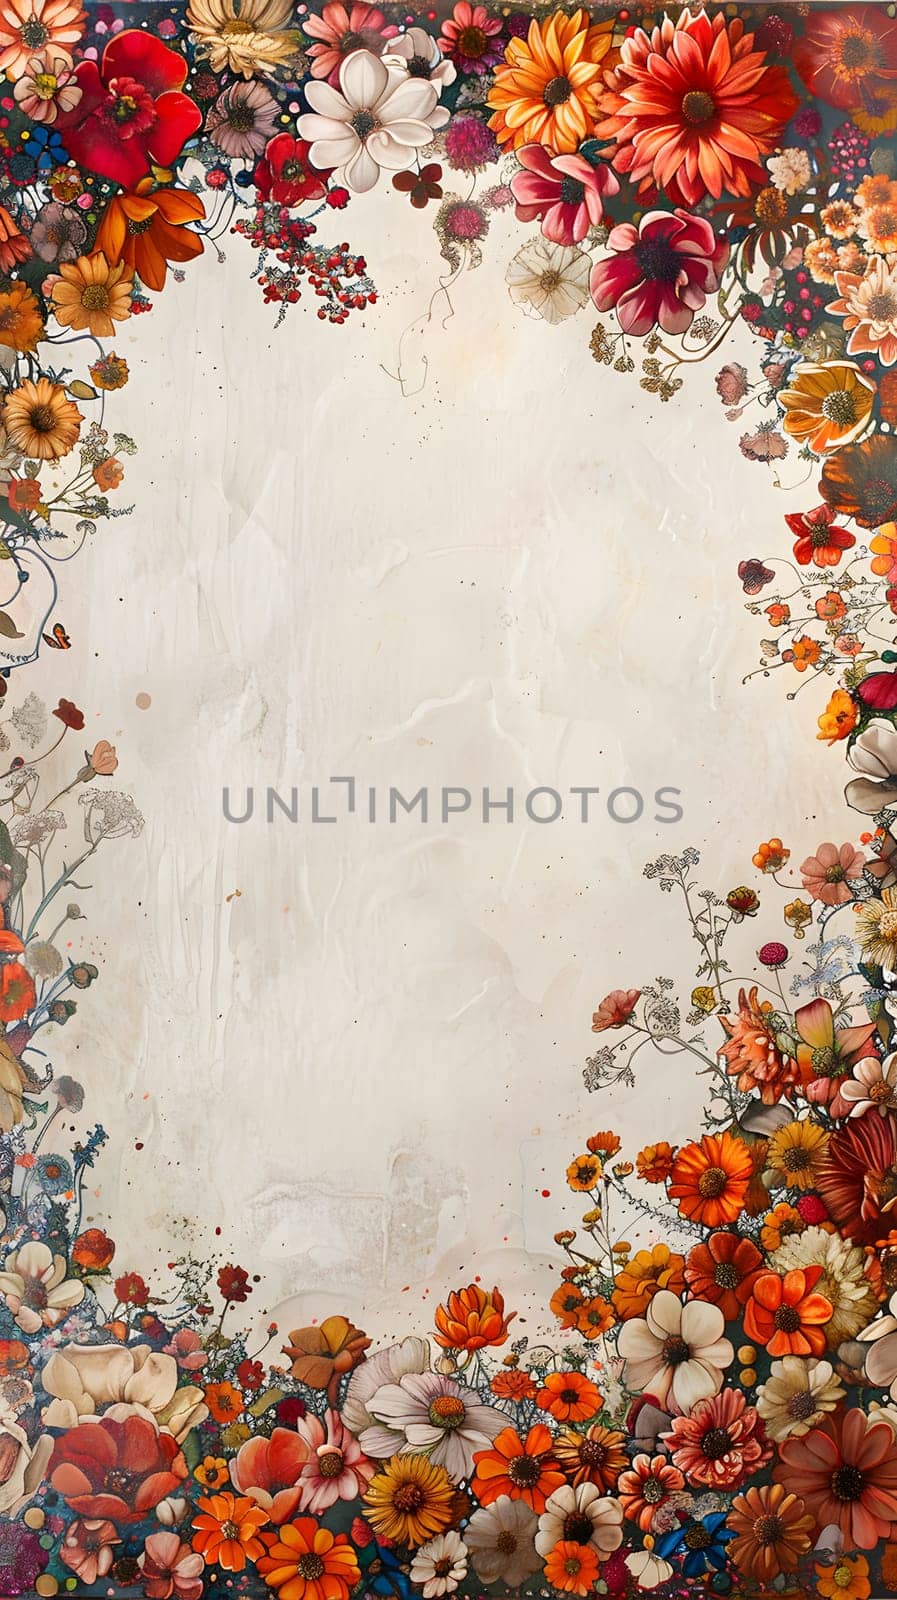 An artful textile pattern featuring flowers on a white background by Nadtochiy